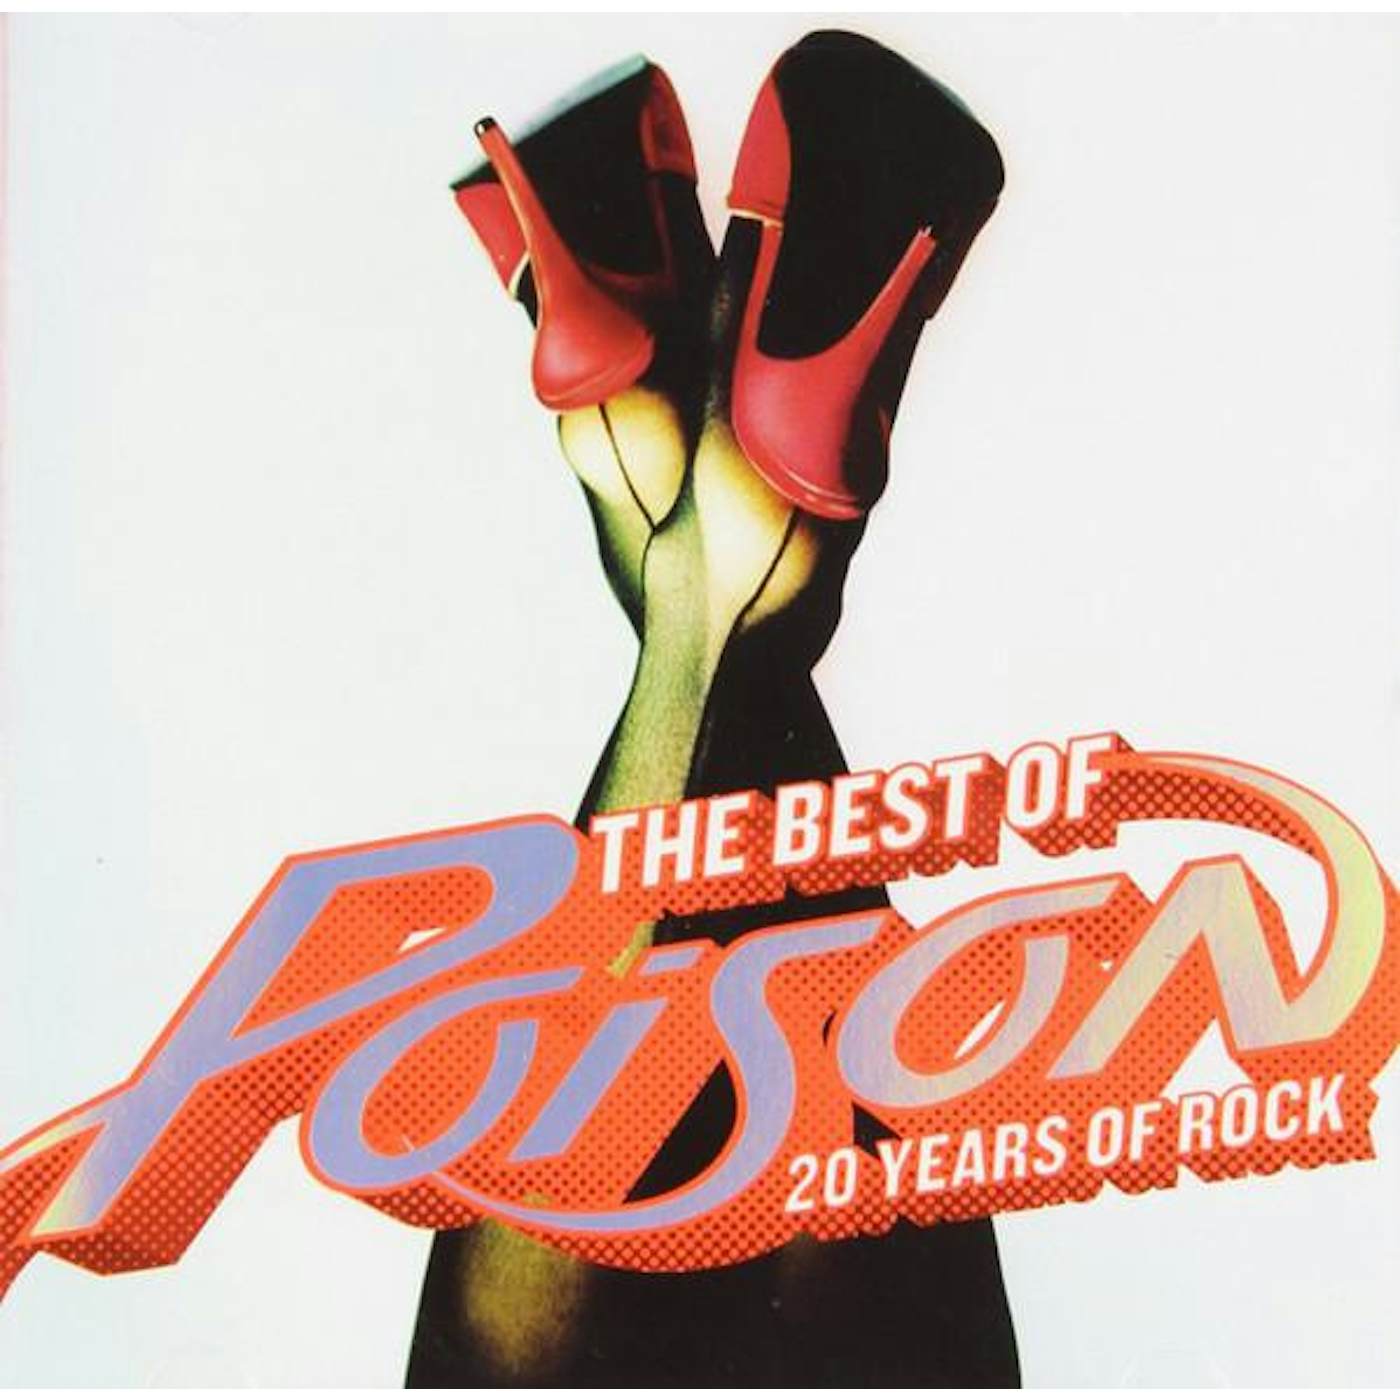 Poison BEST OF: 20 YEARS OF ROCK CD